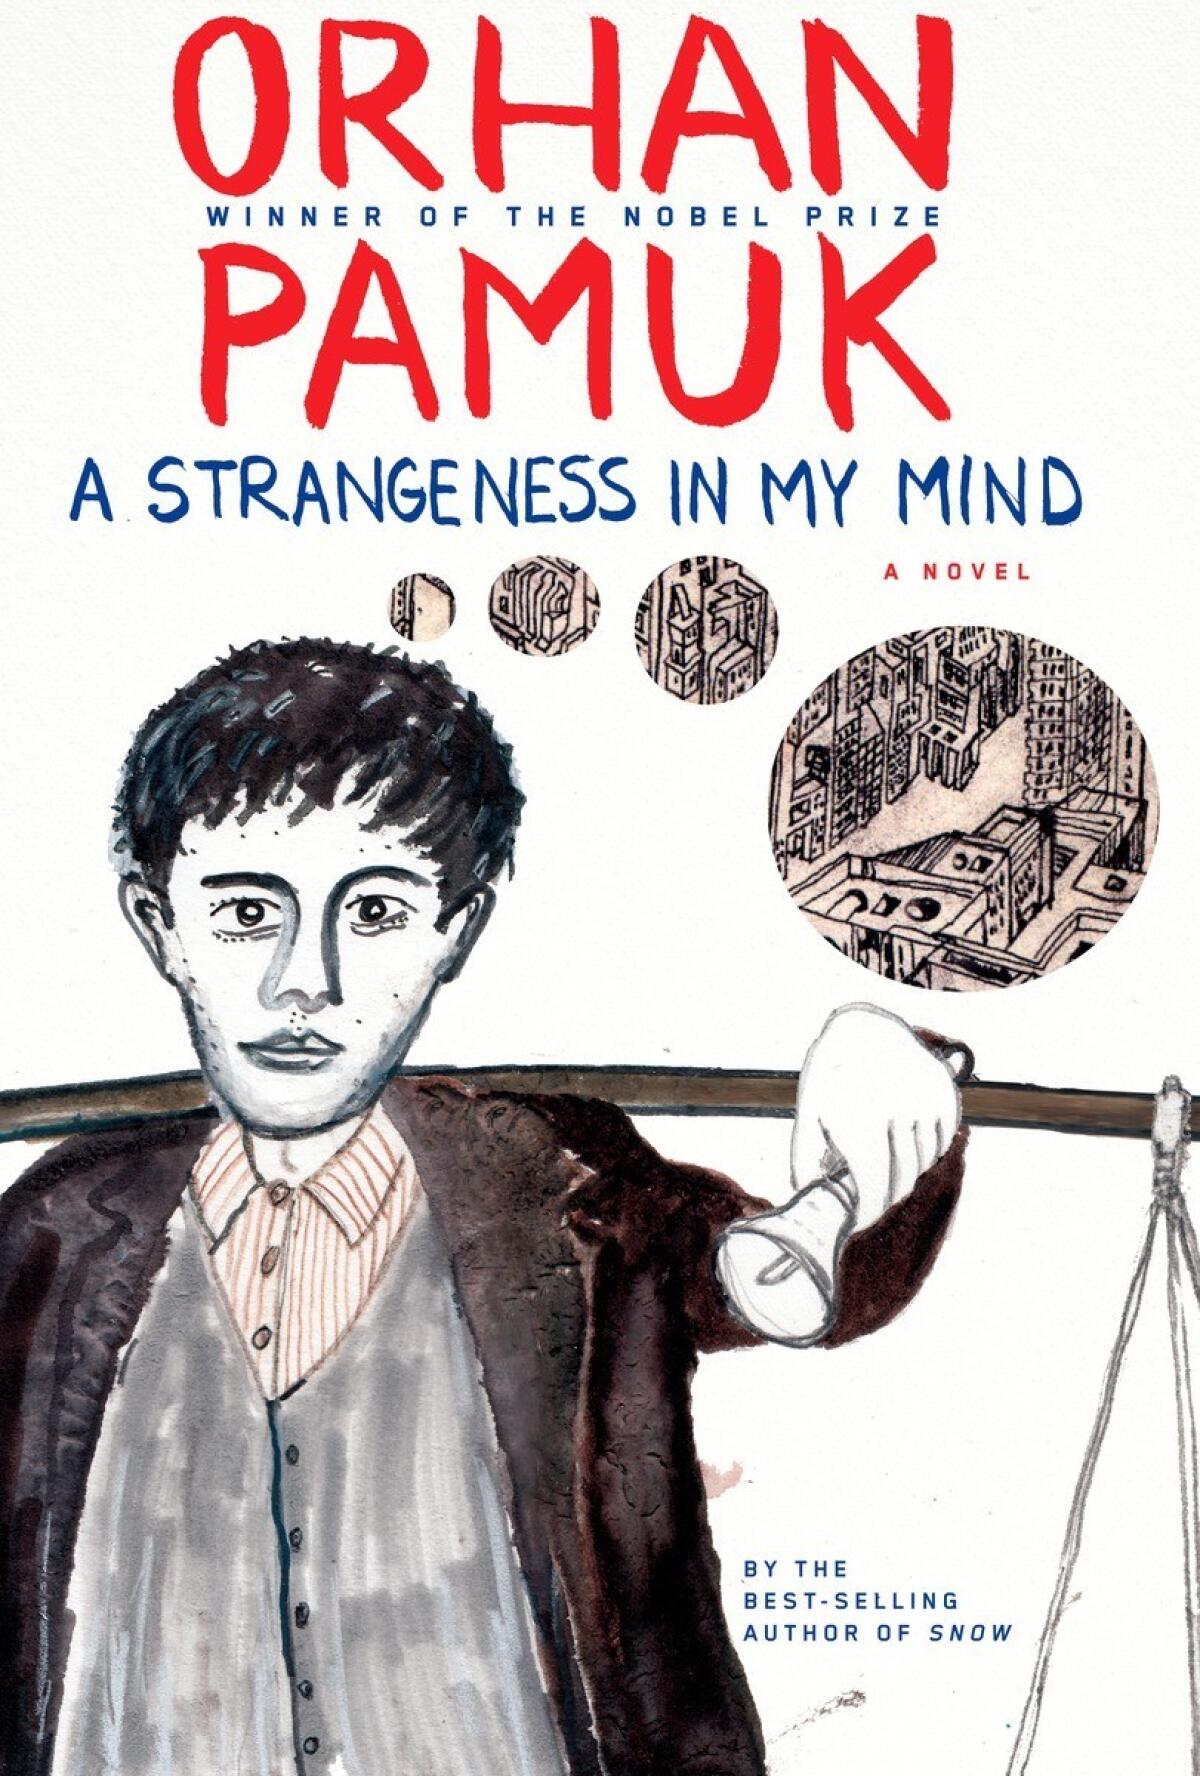 "A Strangeness in My Mind" by Orhan Pamuk